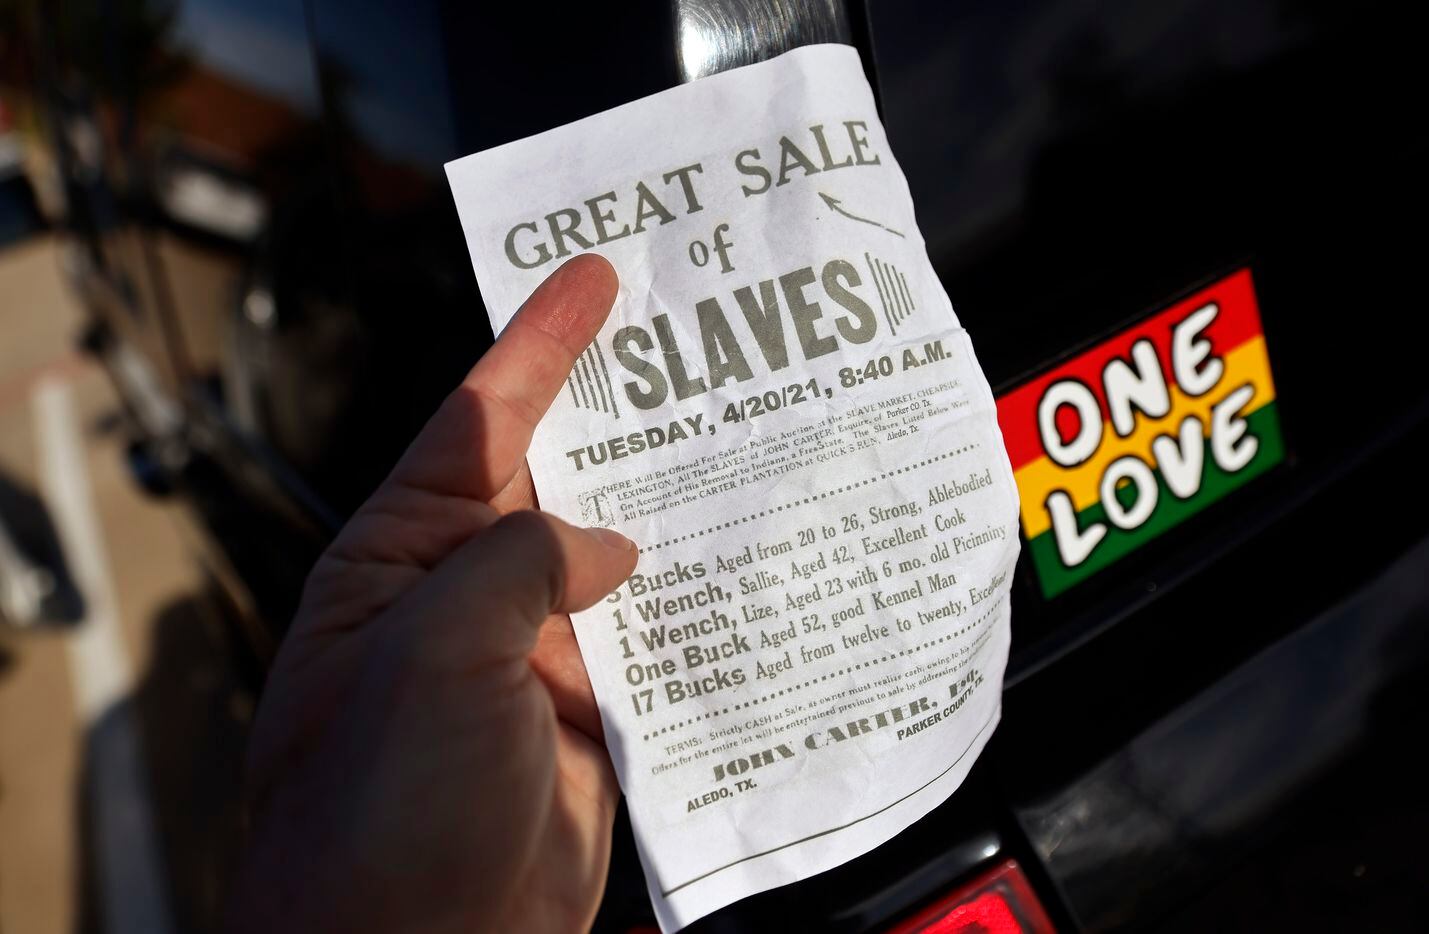 One of the flyers that were​ blowing near the Aledo ISD Monday is pictured outside an Aledo ISD school board meeting, Monday, April 19, 2021. Parents and supporters came to the meeting to voice their concerns about a racist Snapchat group with multiple names, including “Slave Trade” and another that included a racial slur. (Tom Fox/The Dallas Morning News)